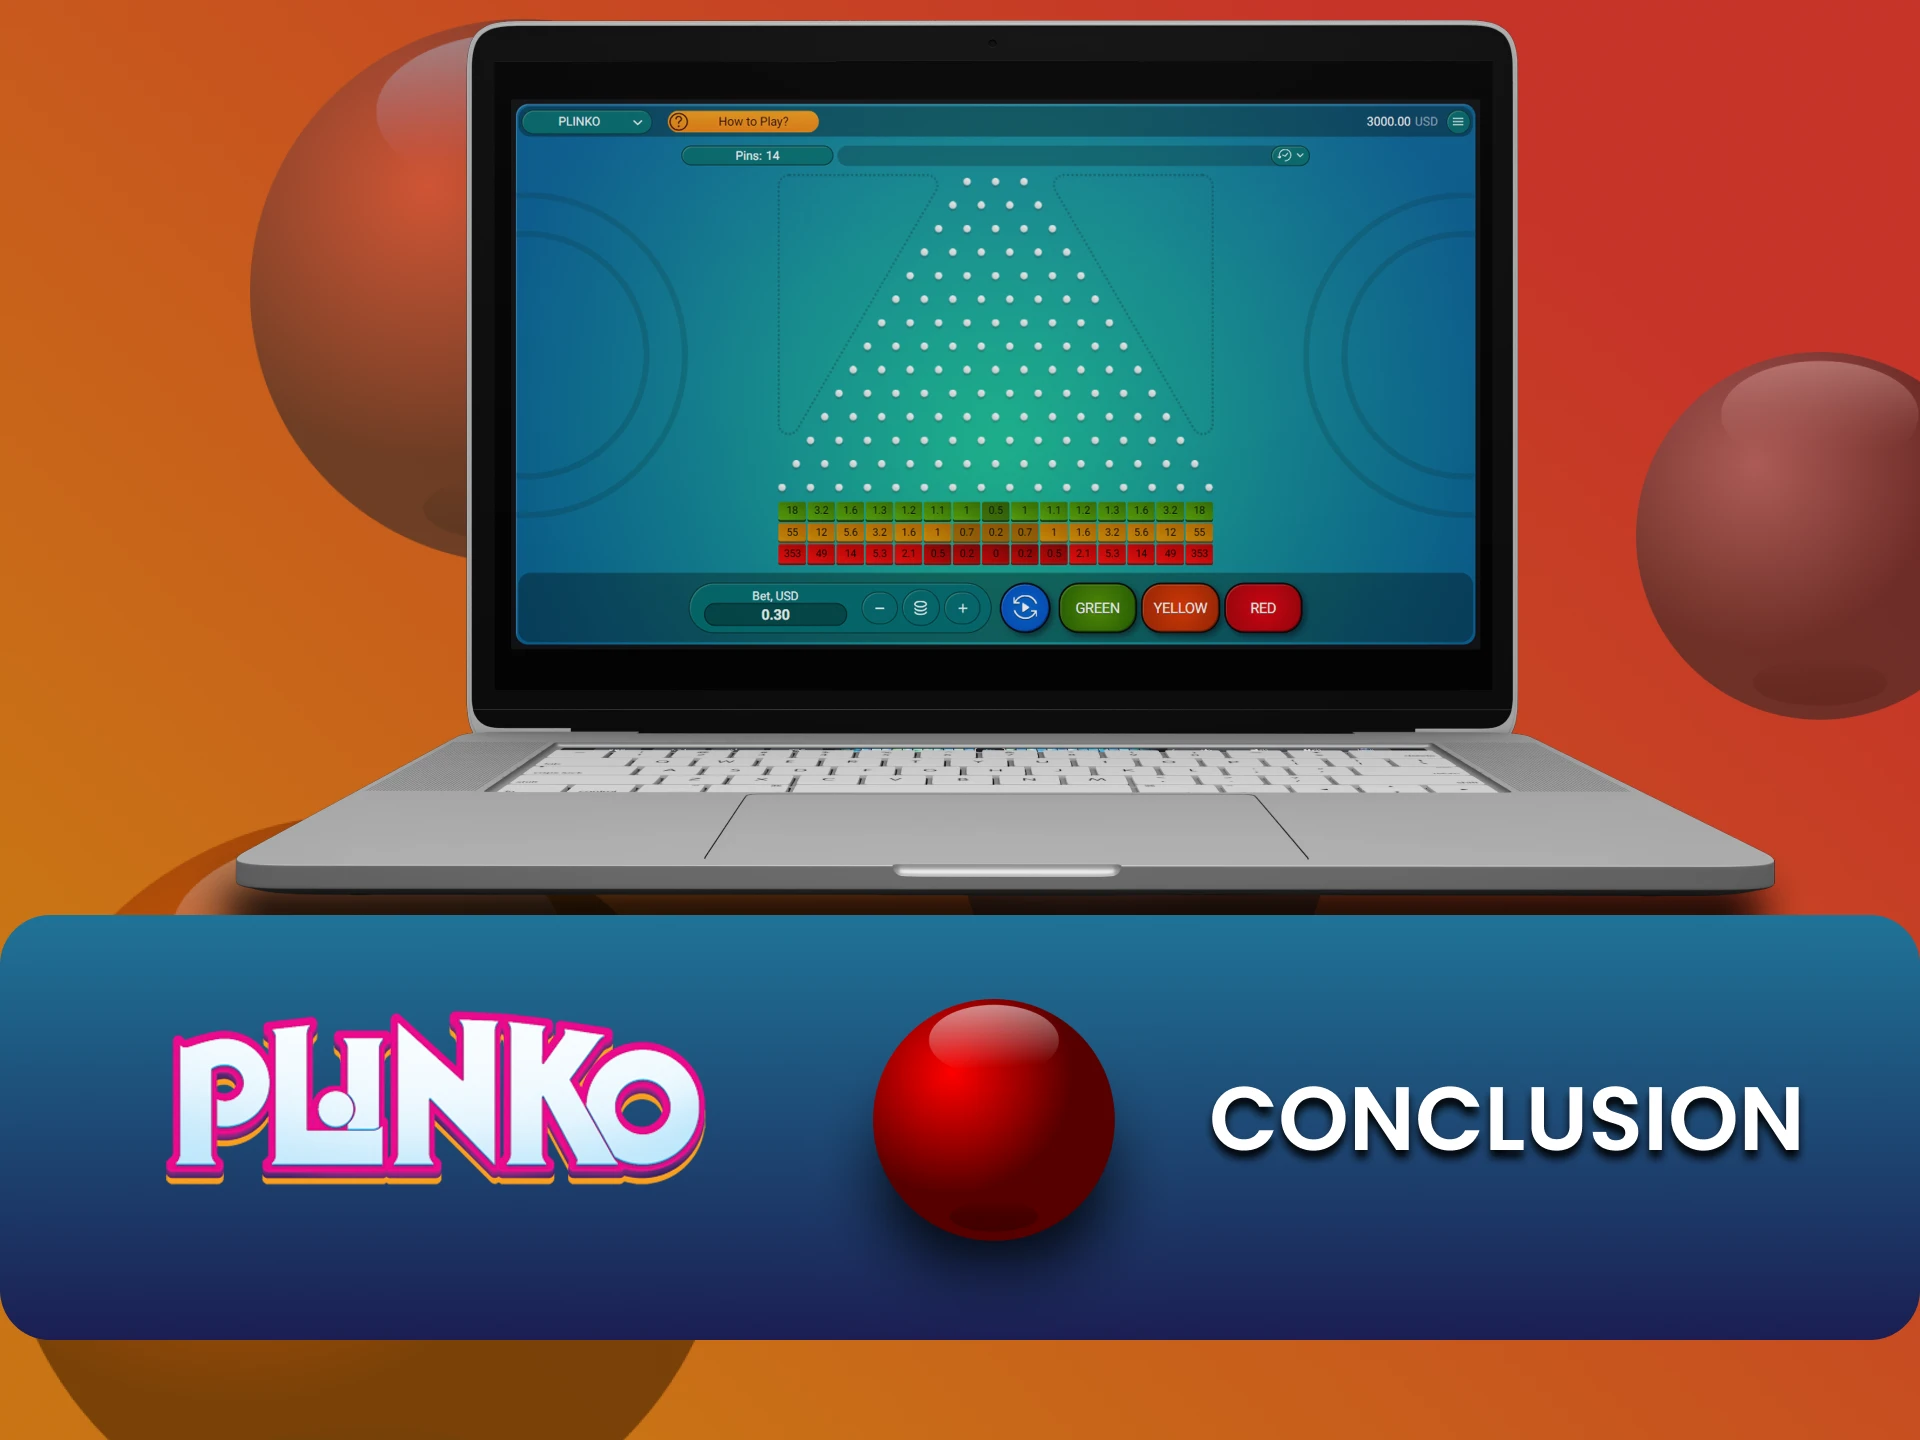 By choosing the right tactics, you will definitely win in Plinko.